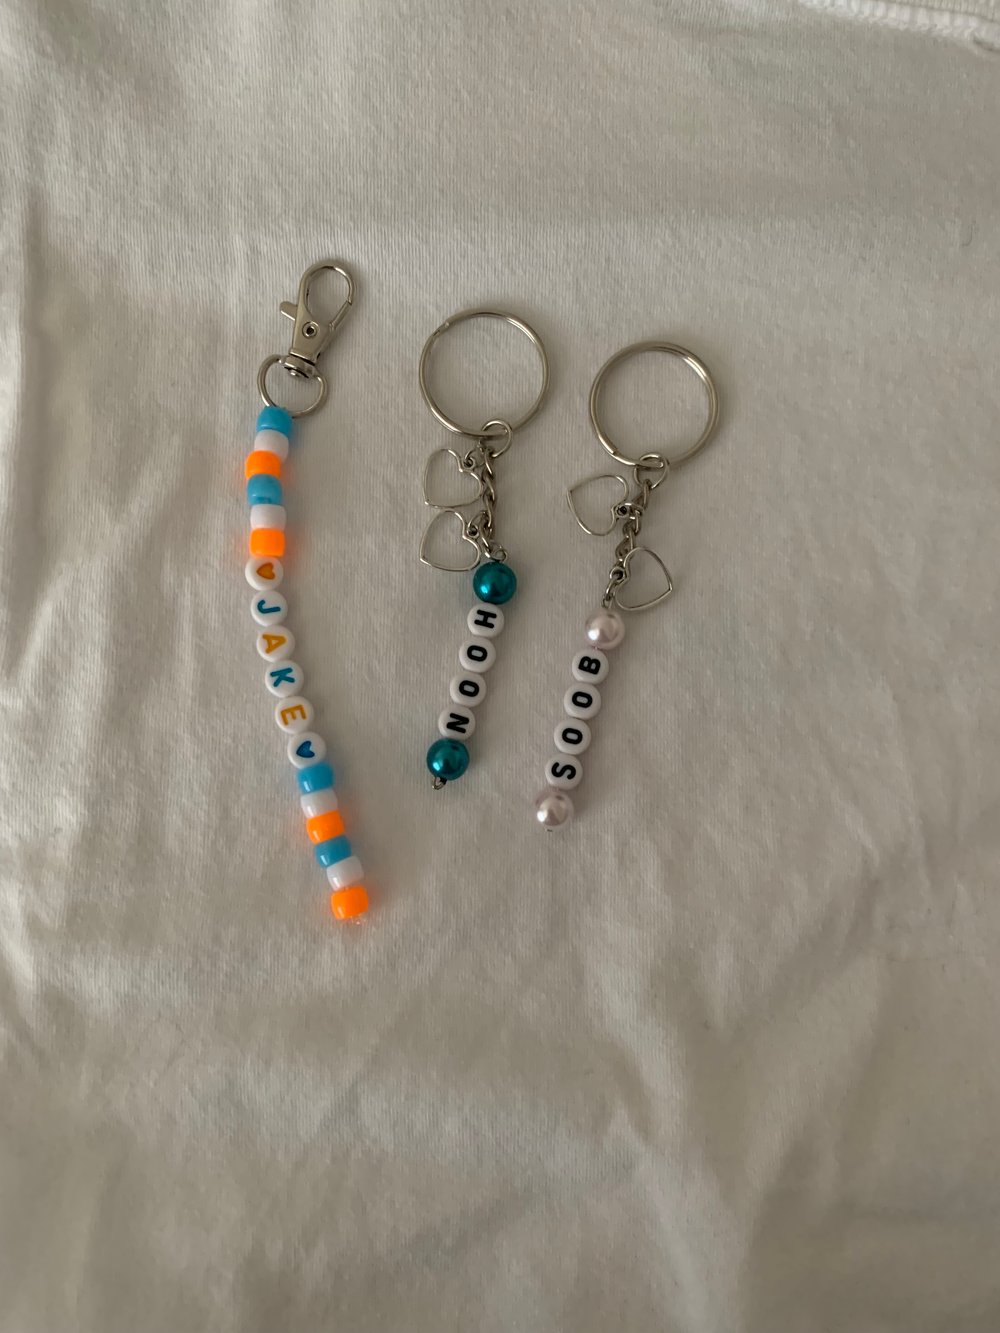 Image of Past Keychains